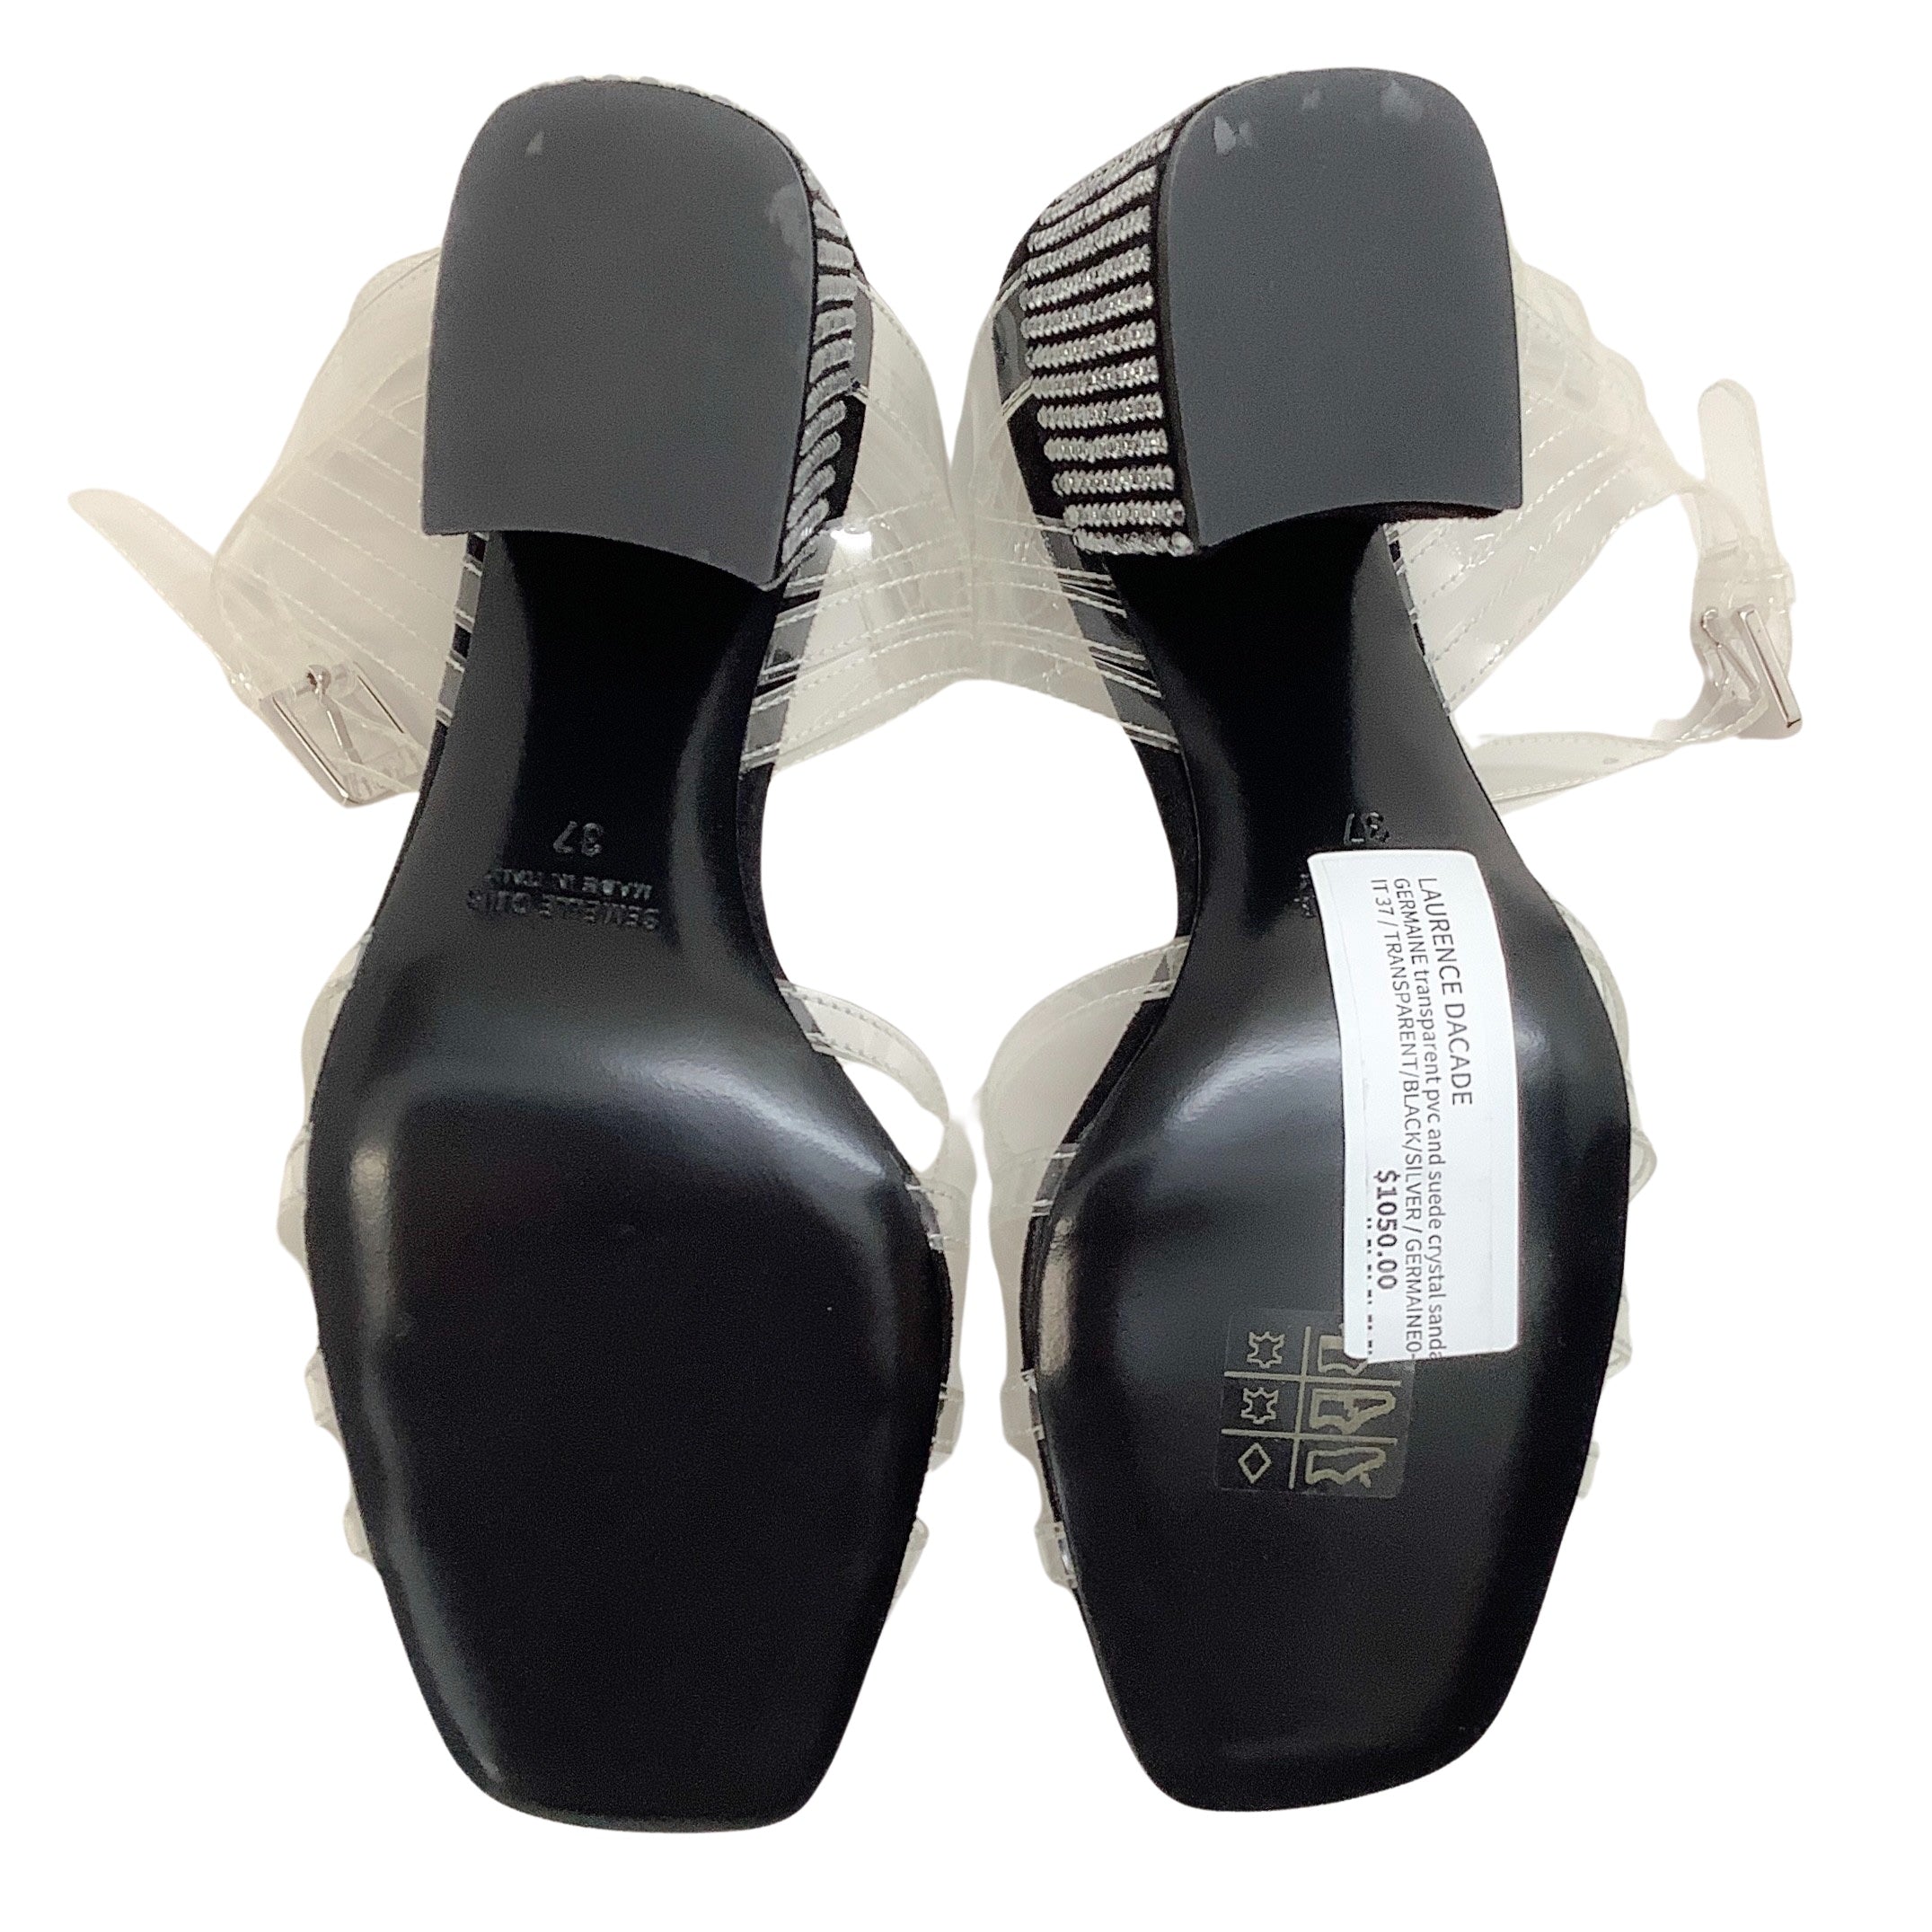 Laurence Dacade PVC and Suede Germanie Sandals